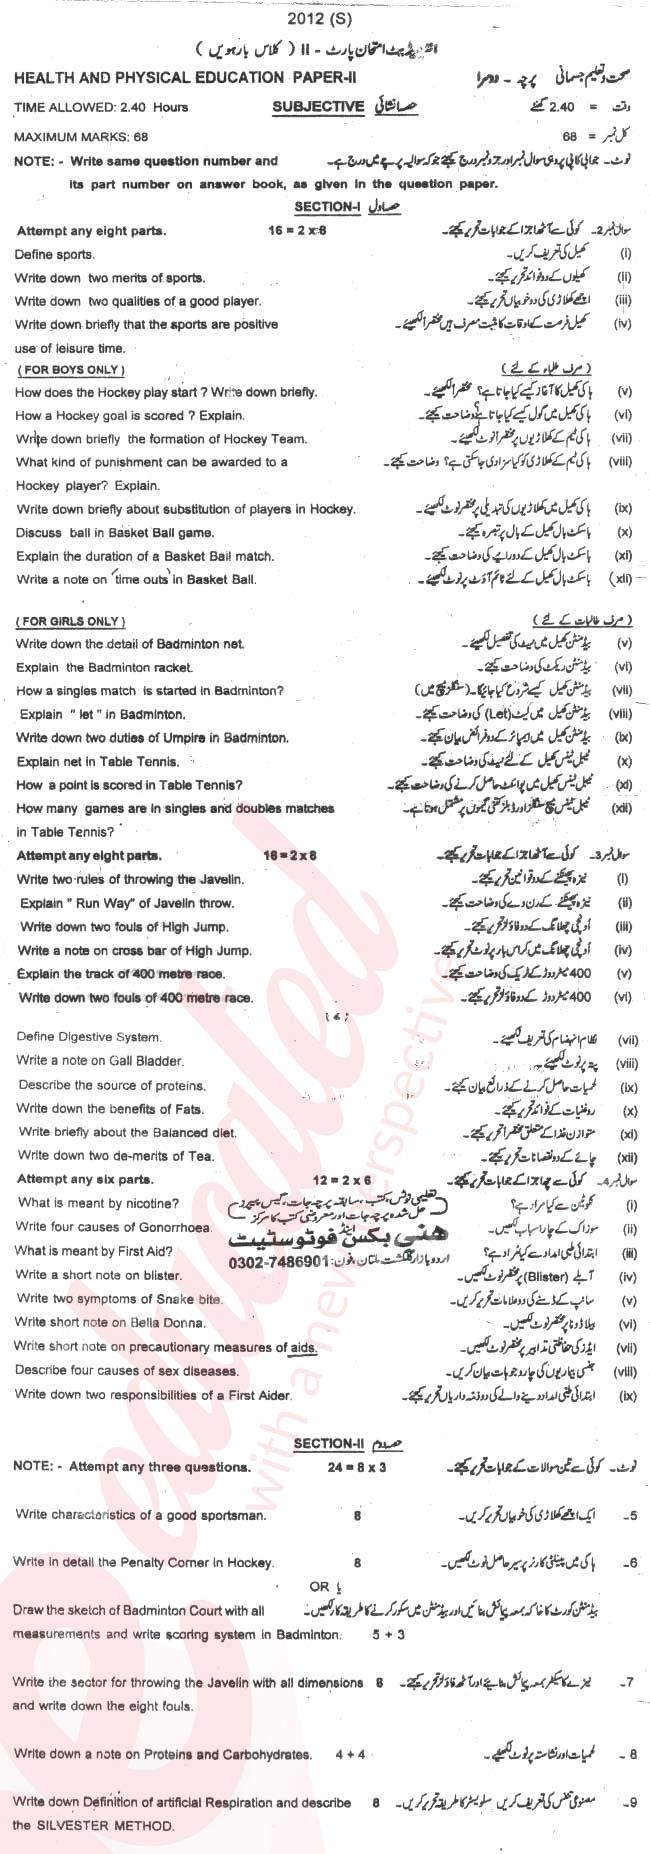 Health and Physical Education FA Part 2 Past Paper Group 2 BISE Multan 2012